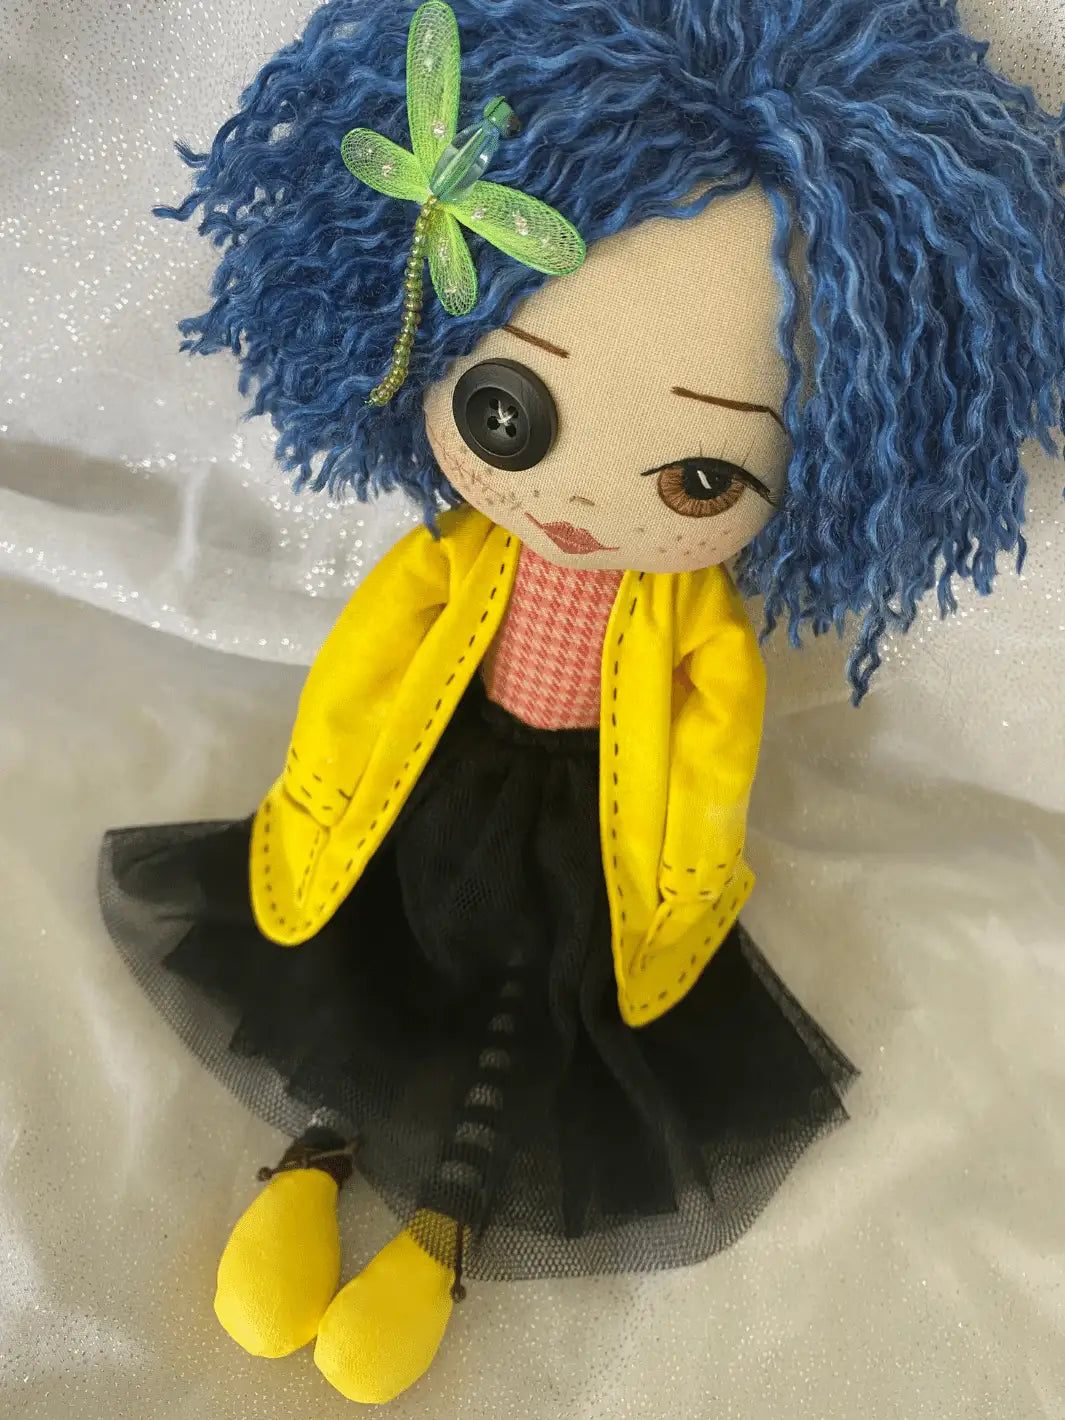 handmade doll with blue hair, black tulle skirt, yellow jacket, black and white stripe tights, brown eyes